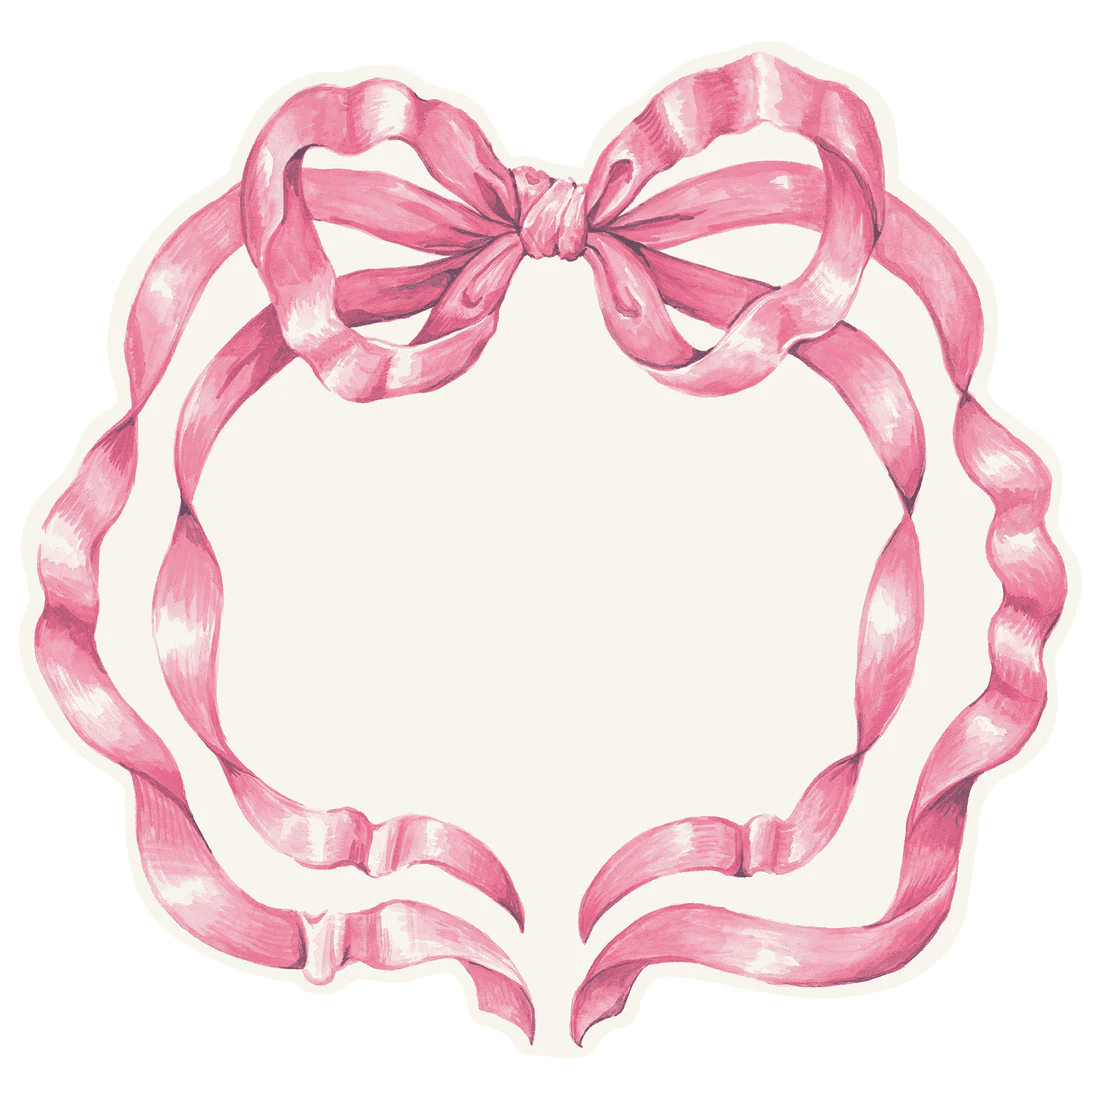 Die Cut Pink Bow Placemat – 12 Sheets | Hester & Cook | Iris Gifts & Décor